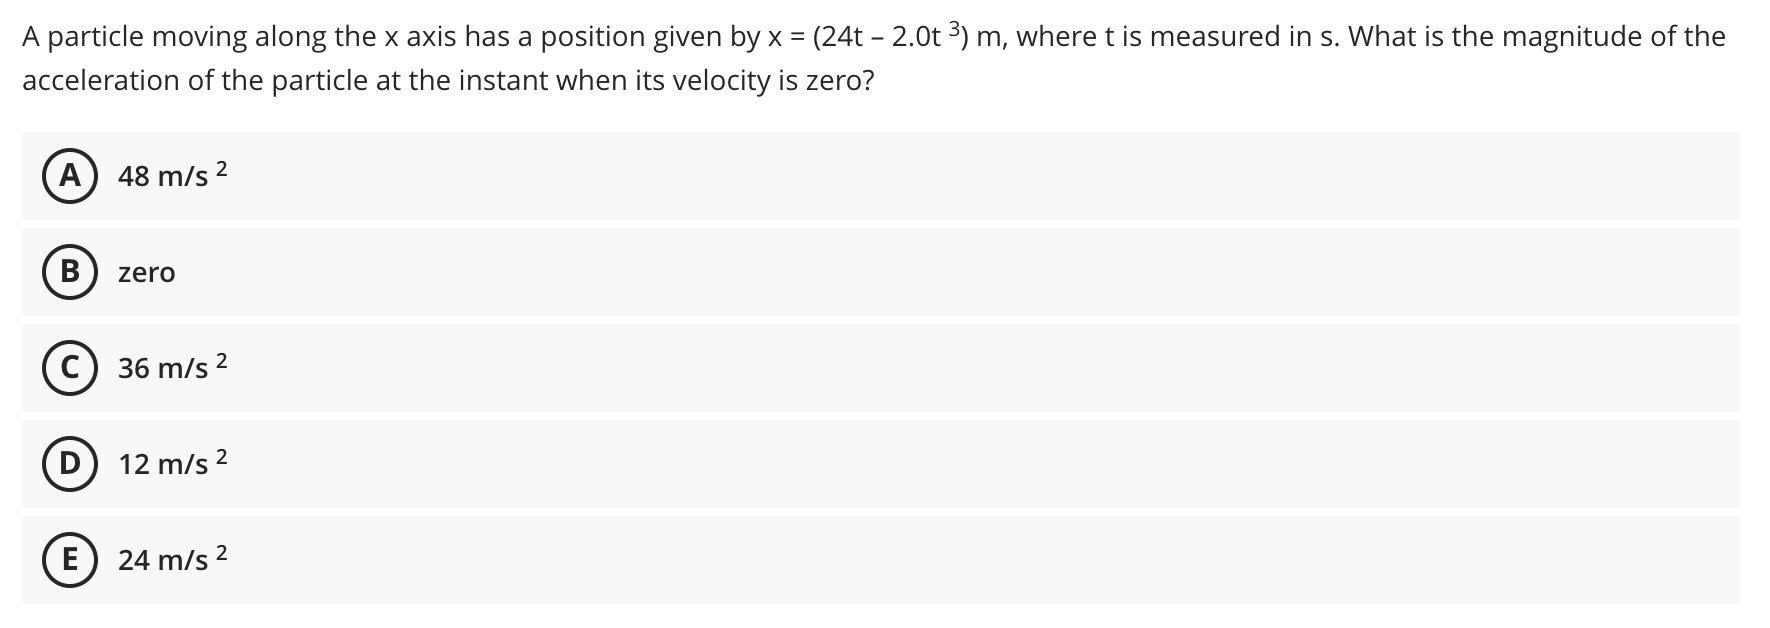 A particle moving along the x axis has a position given by x = (24t – 2.0t 3) m, where t is measured in s. What is the magnitude of the
acceleration of the particle at the instant when its velocity is zero?
